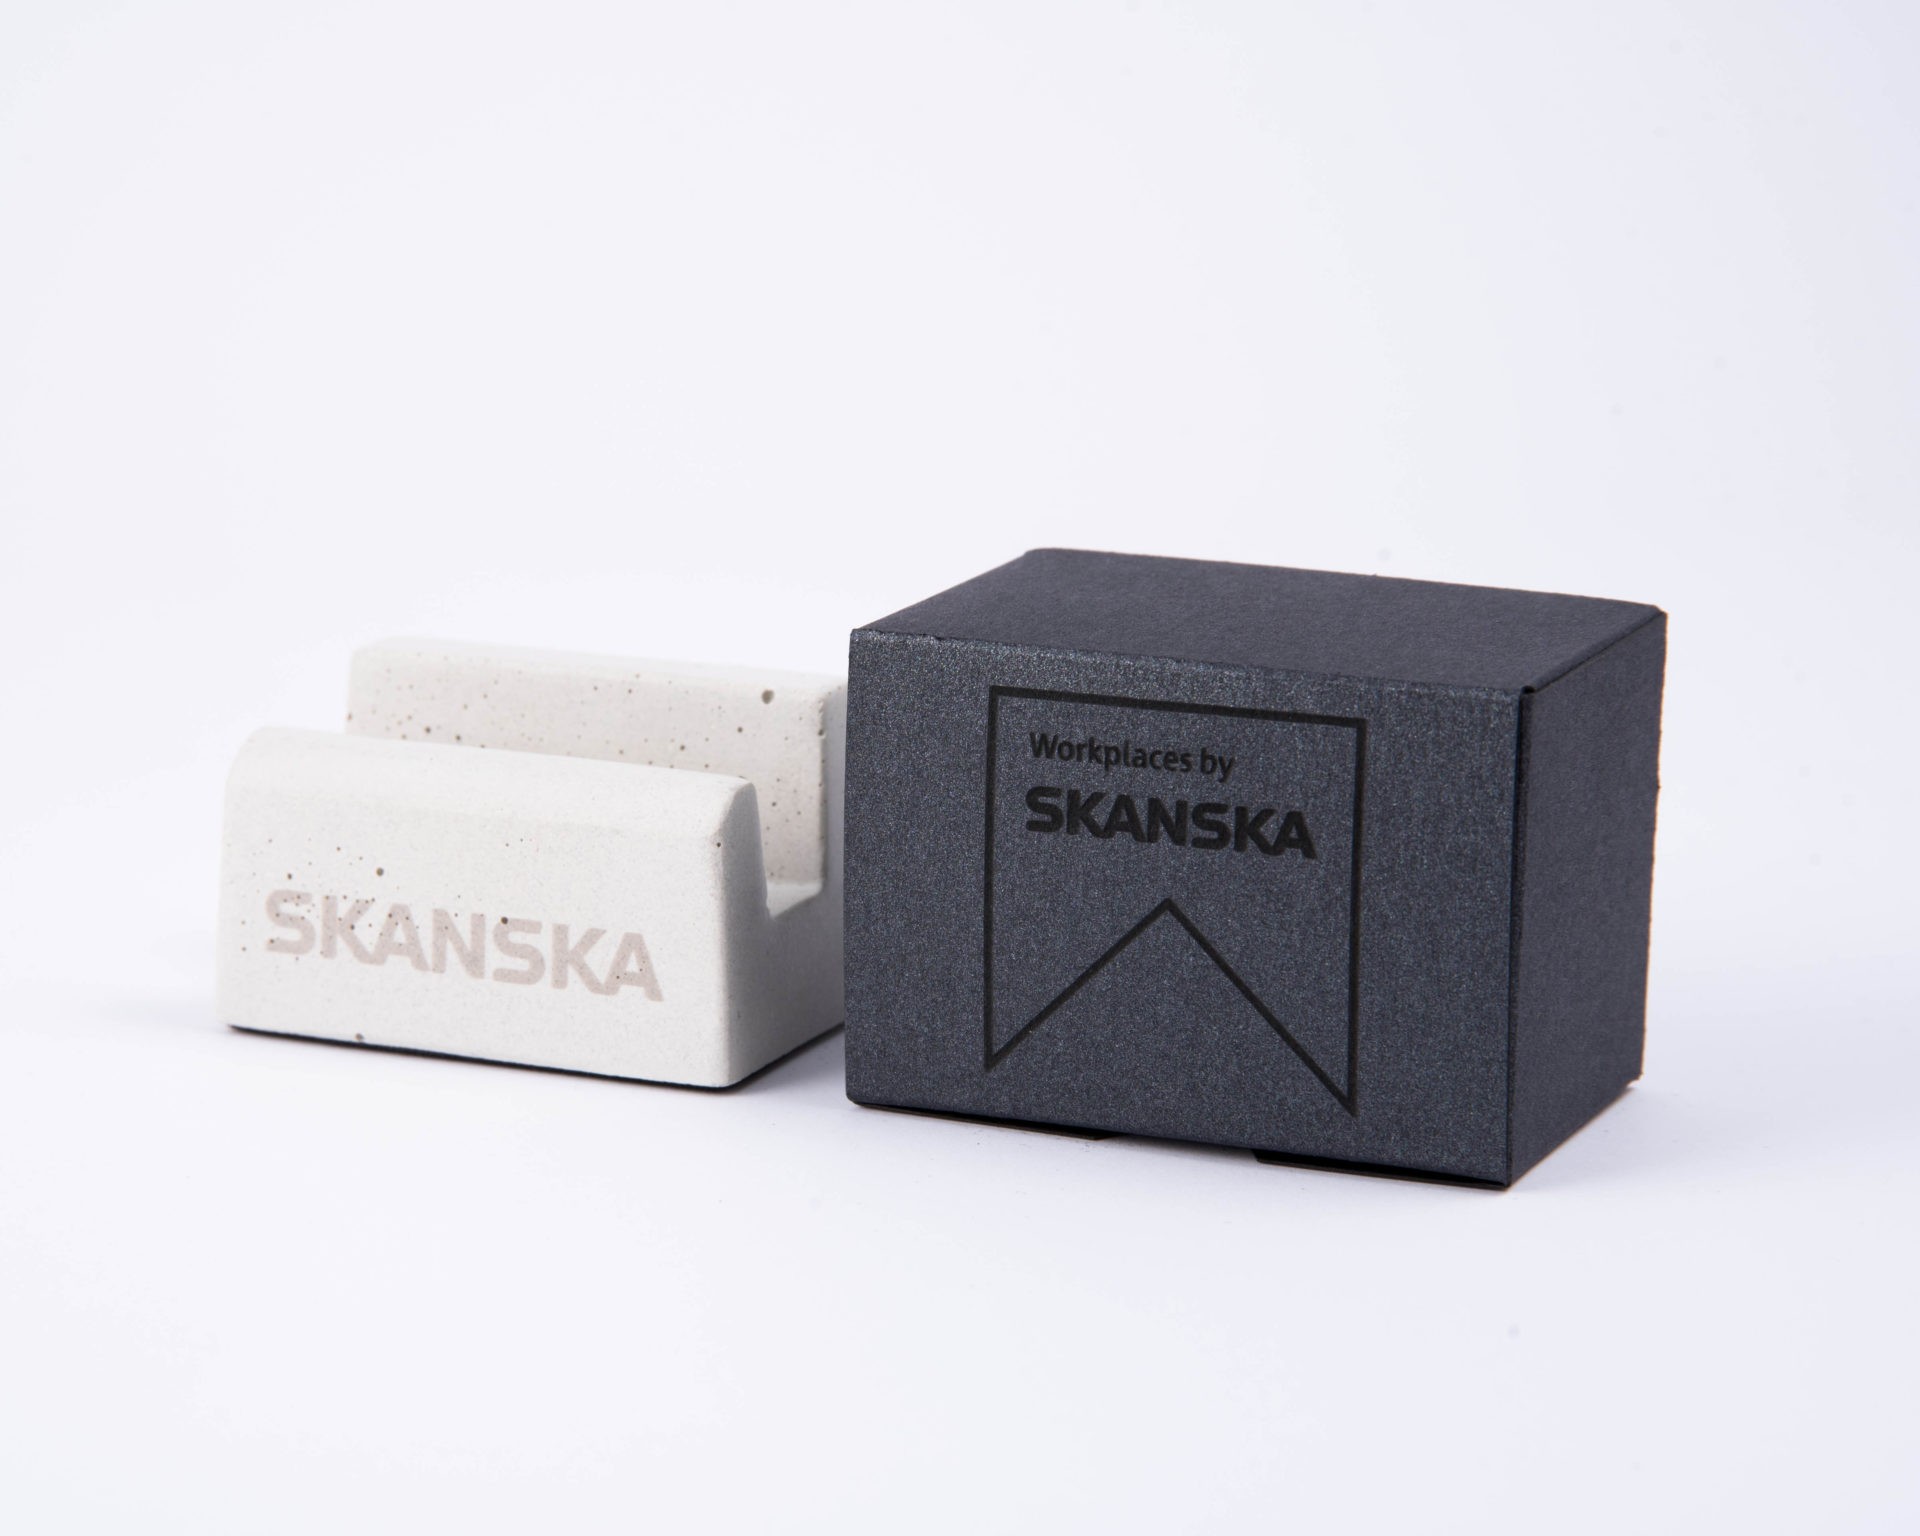 Branded concrete business gift with packaging produced for Skanska